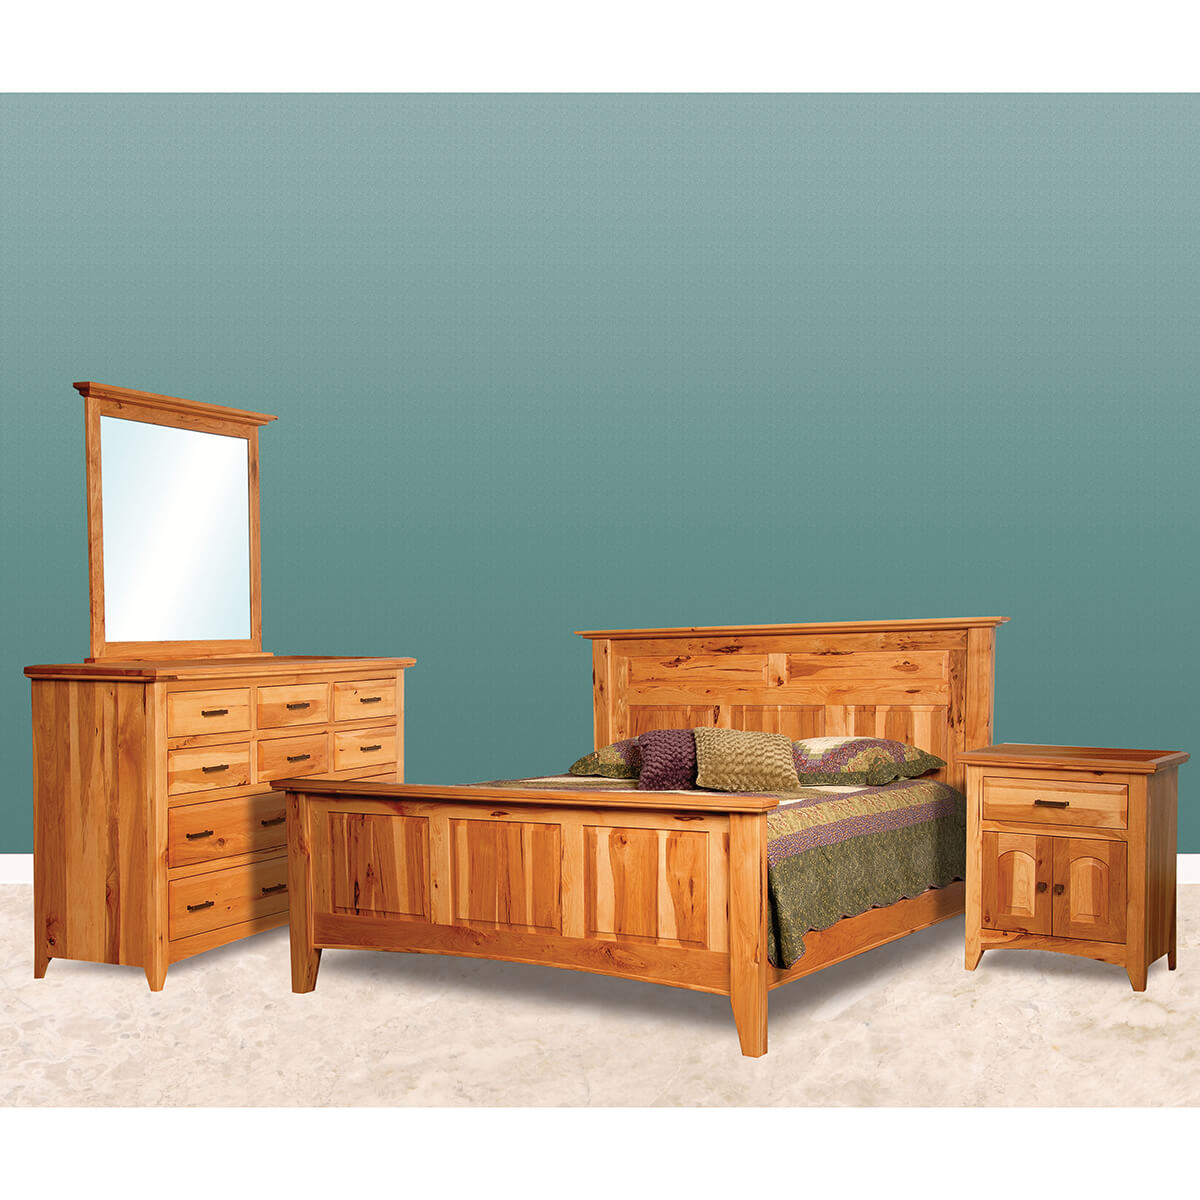 Read more about the article Premier Shaker Bed